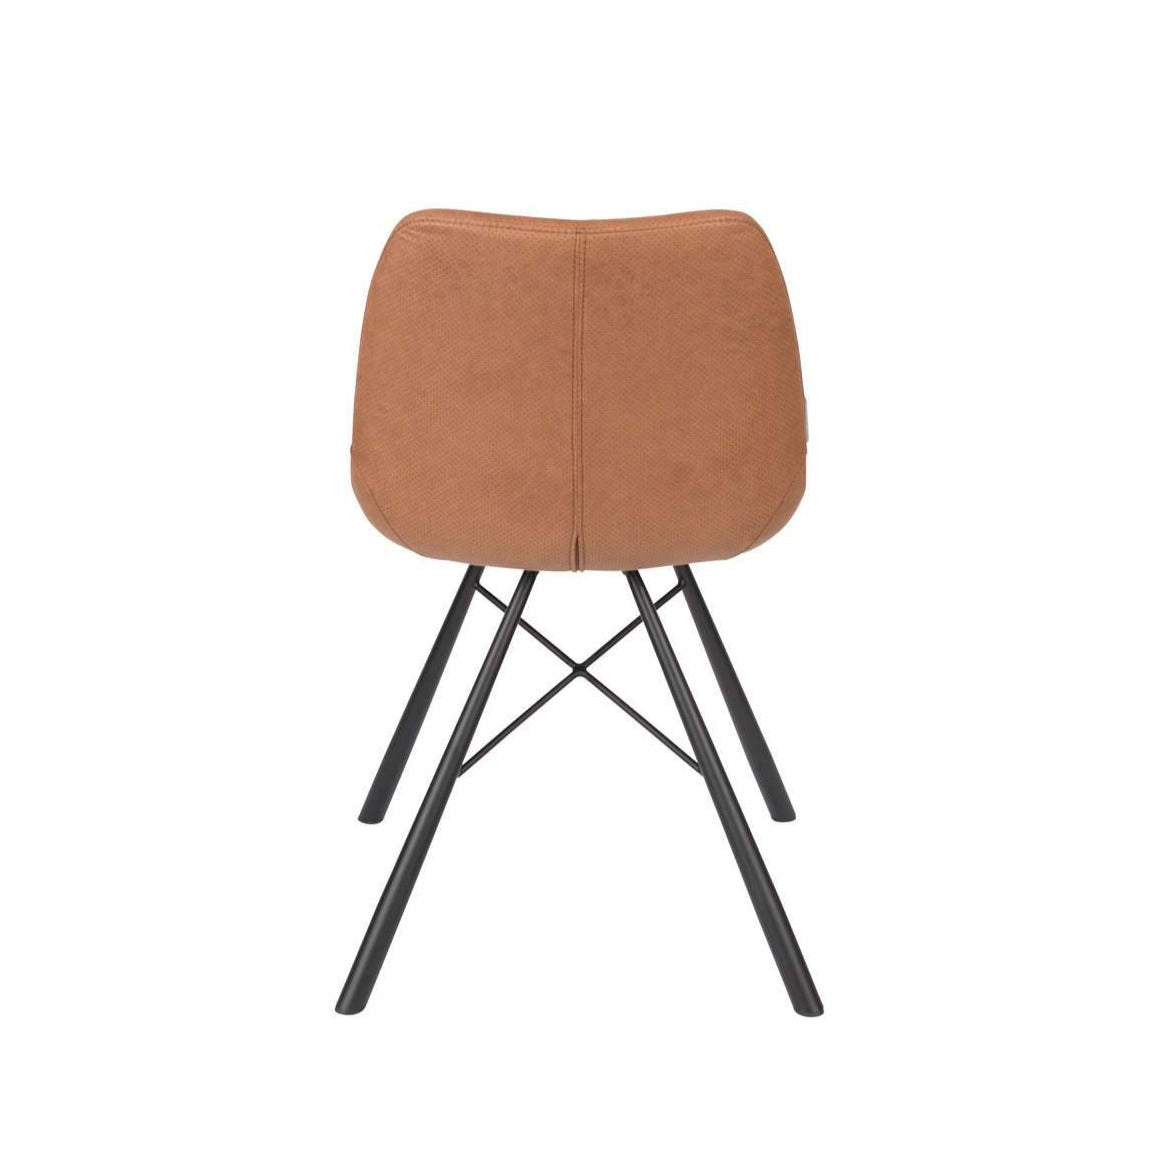 BRENT AIR brown chair, Zuiver, Eye on Design